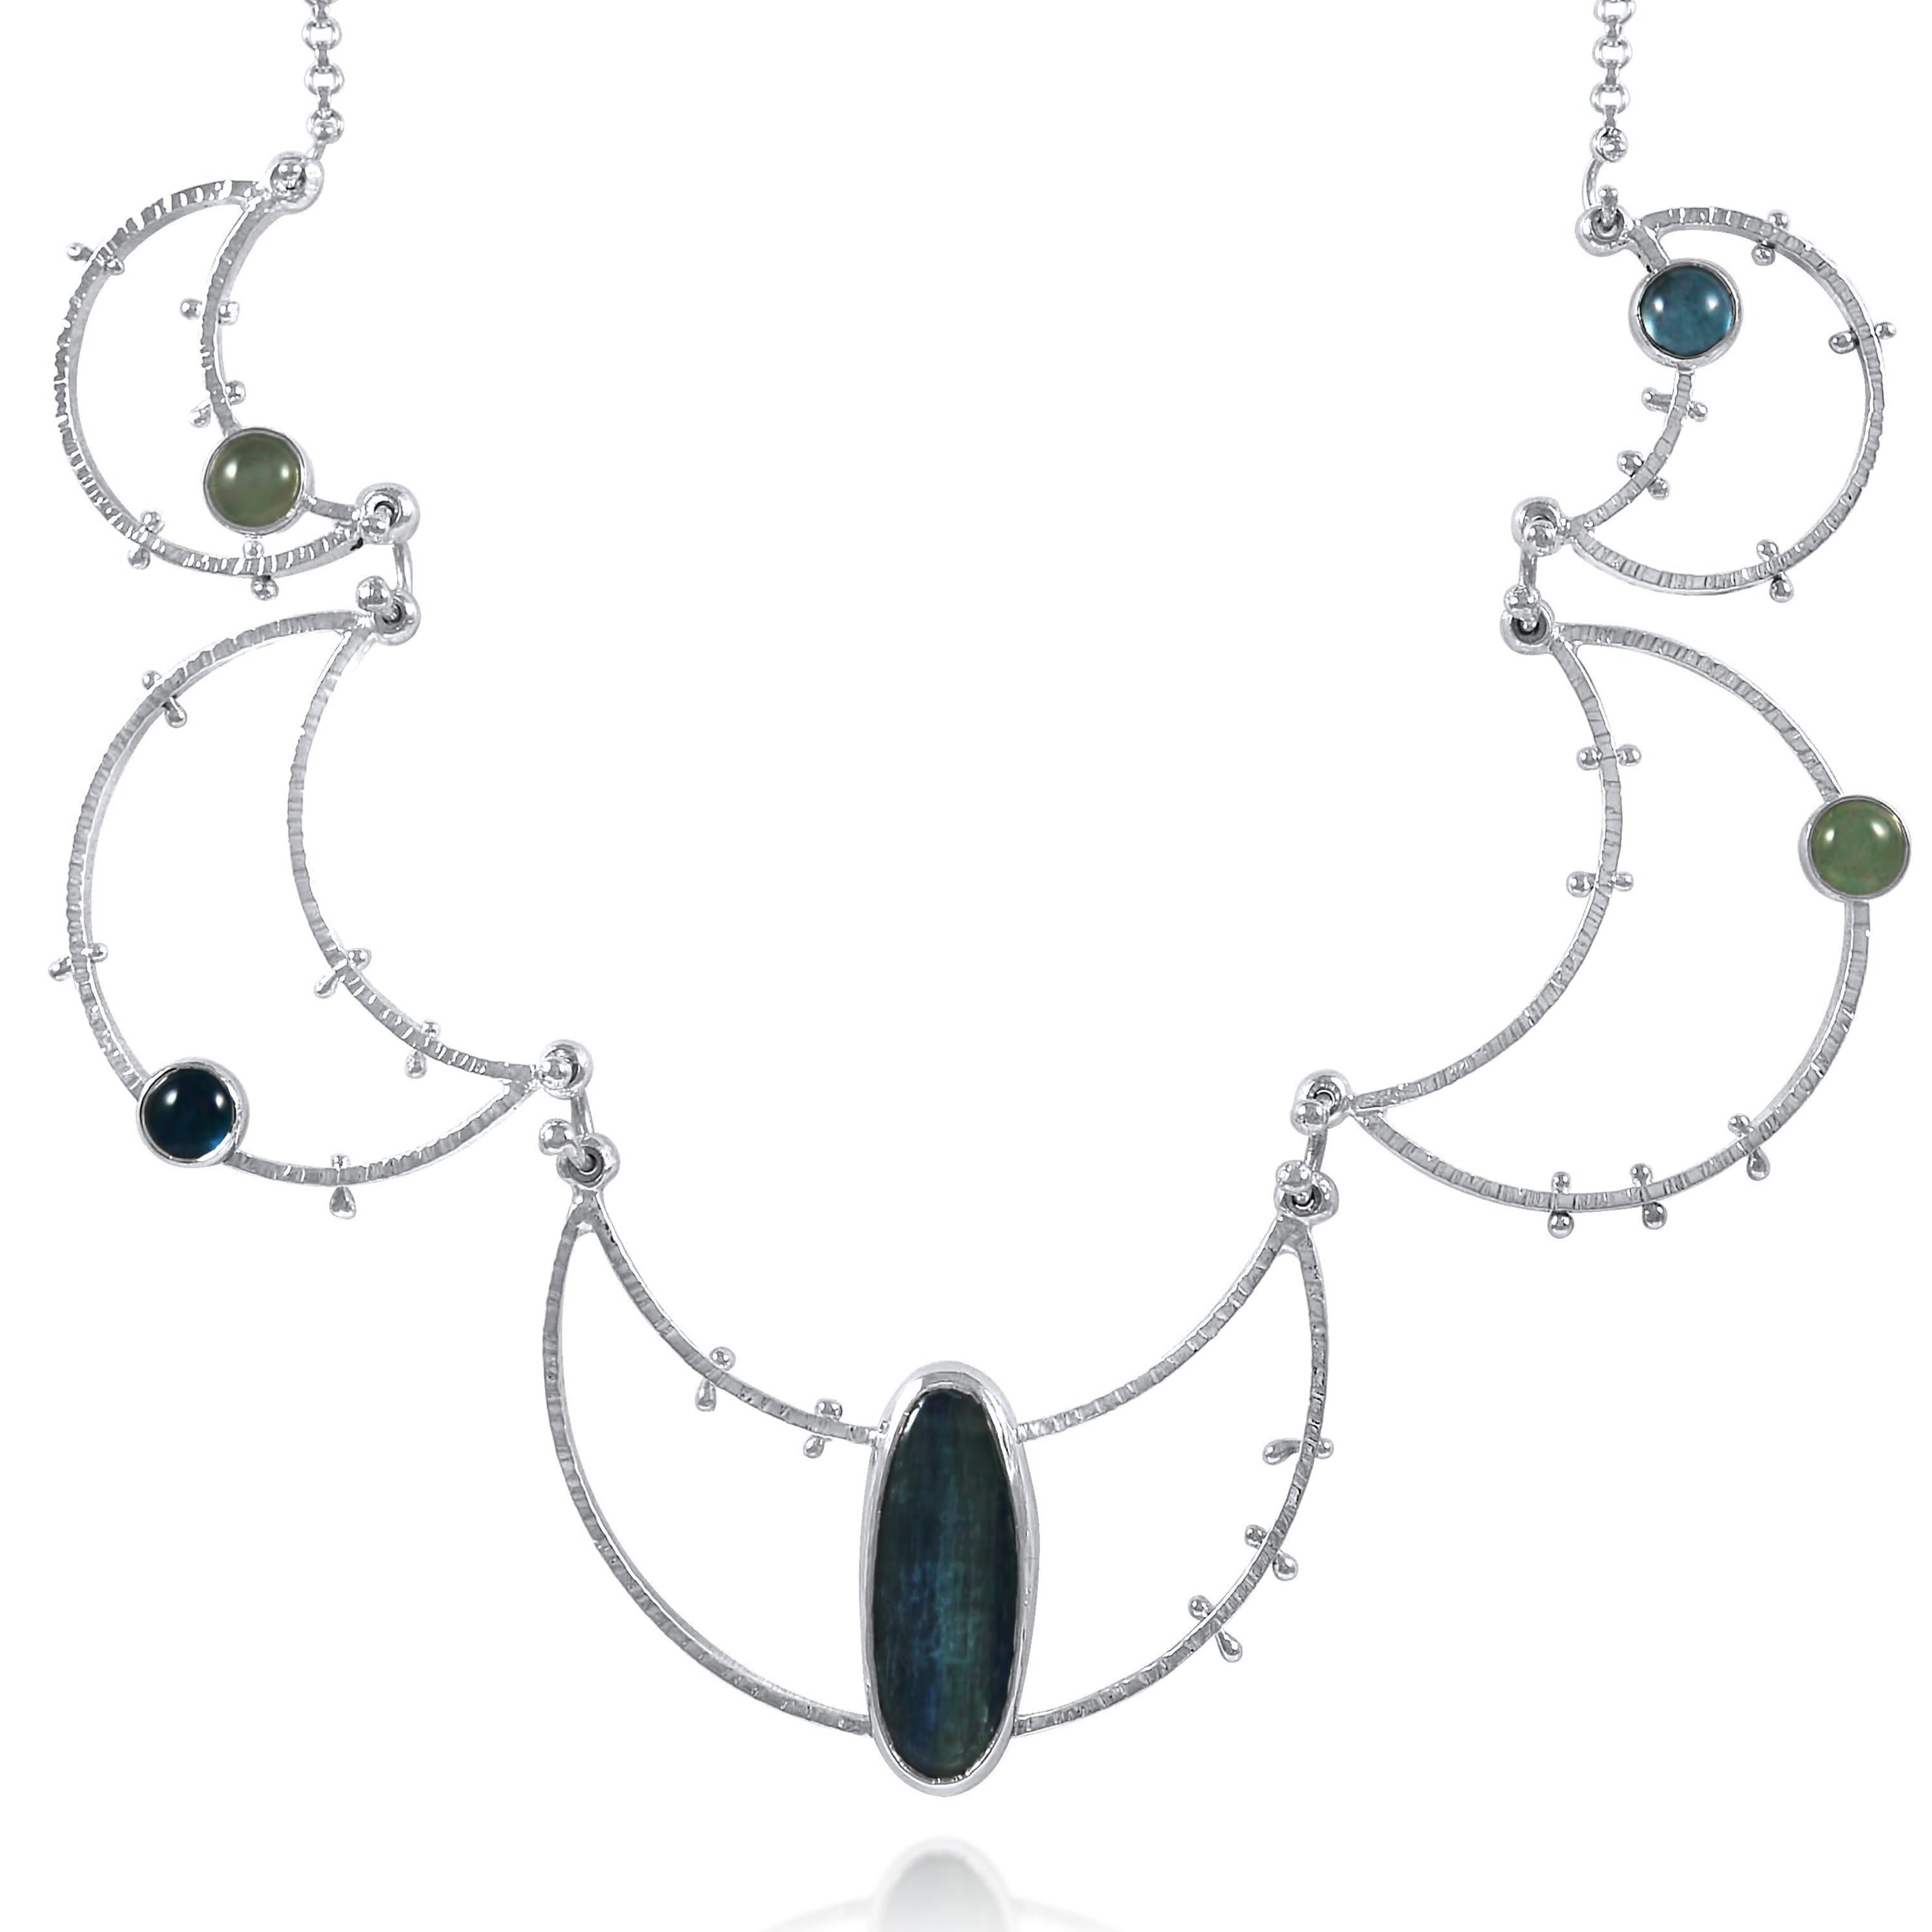 Crater Statement Necklace